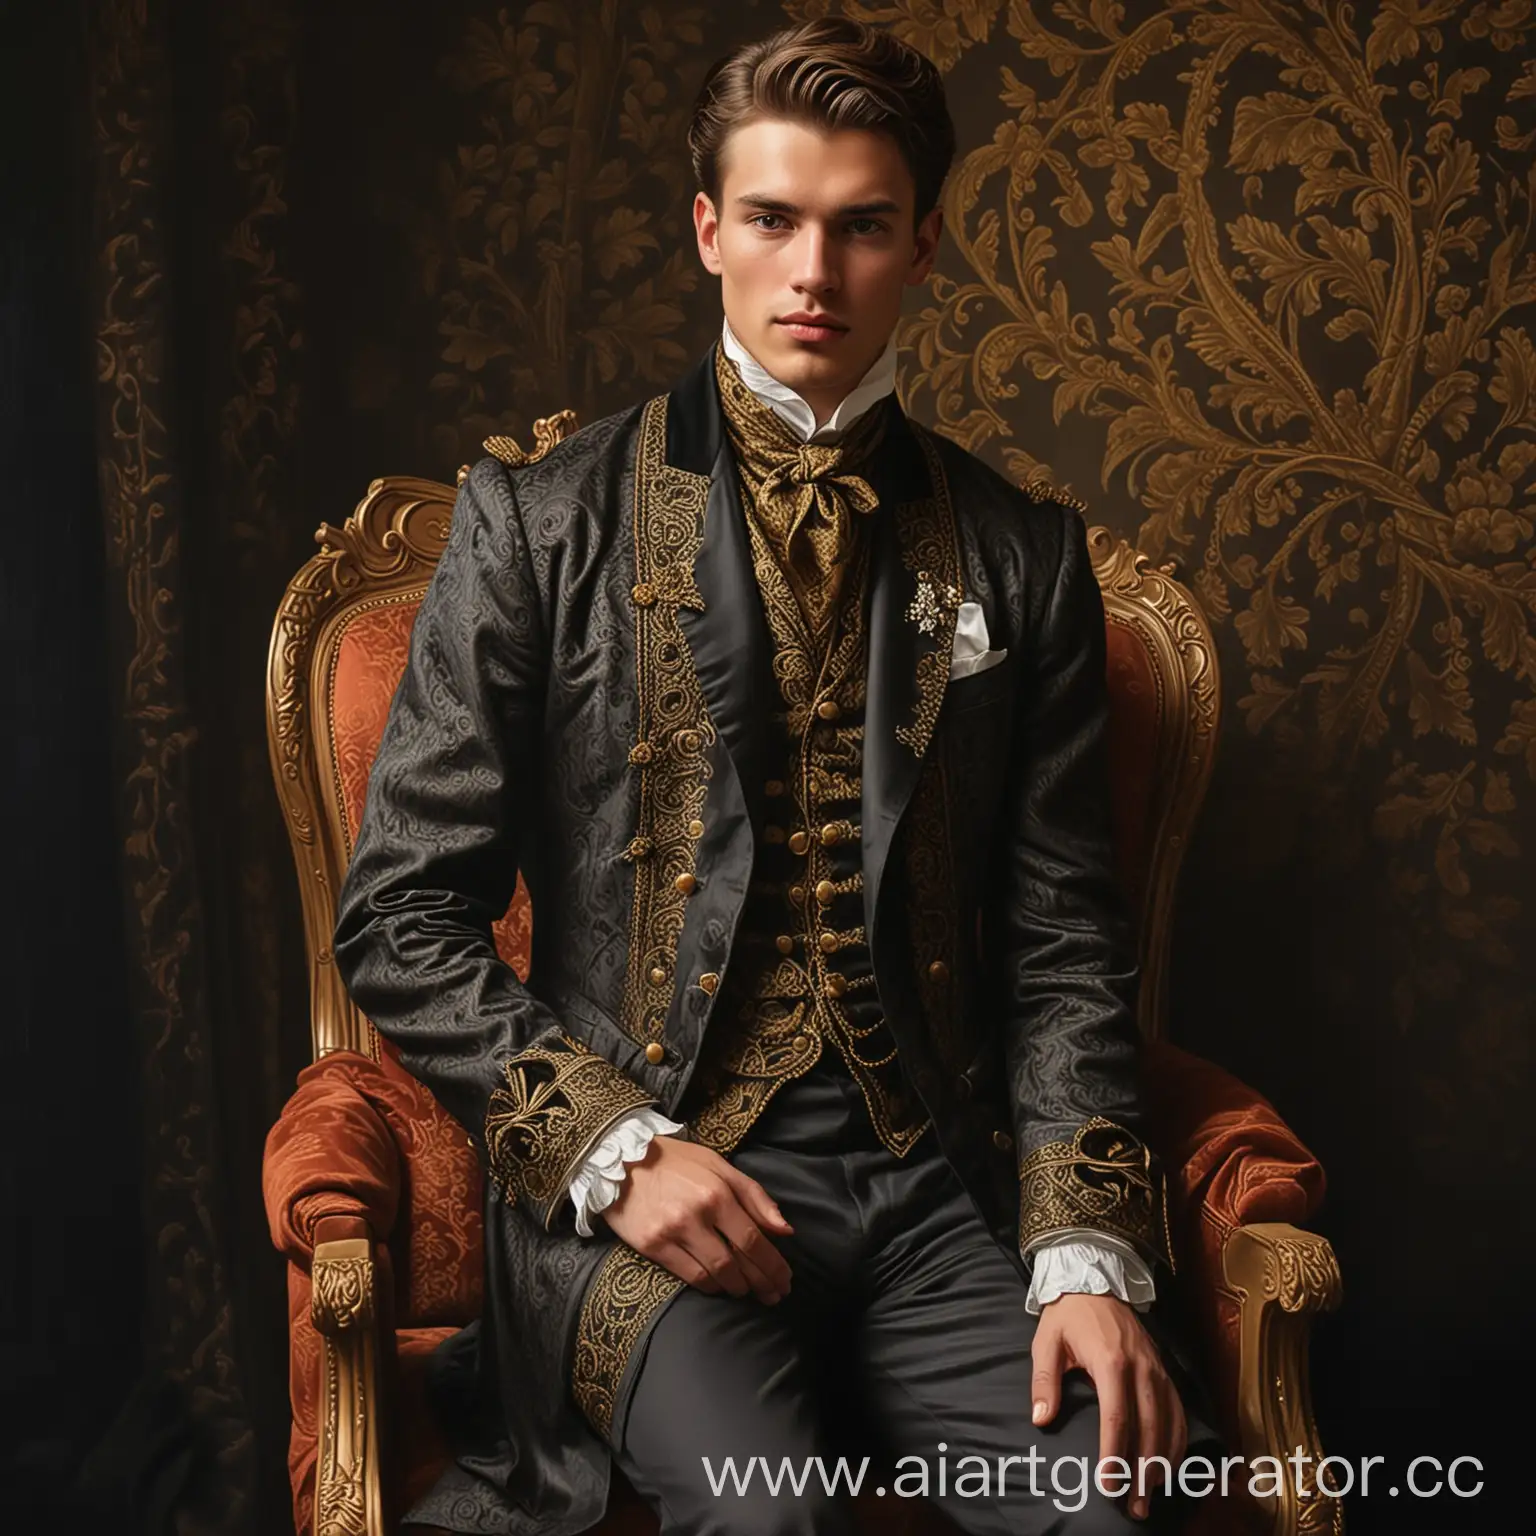 Elegant-19th-Century-Gentleman-Portrait-in-Embroidered-Frock-Coat-and-Baroque-Chair